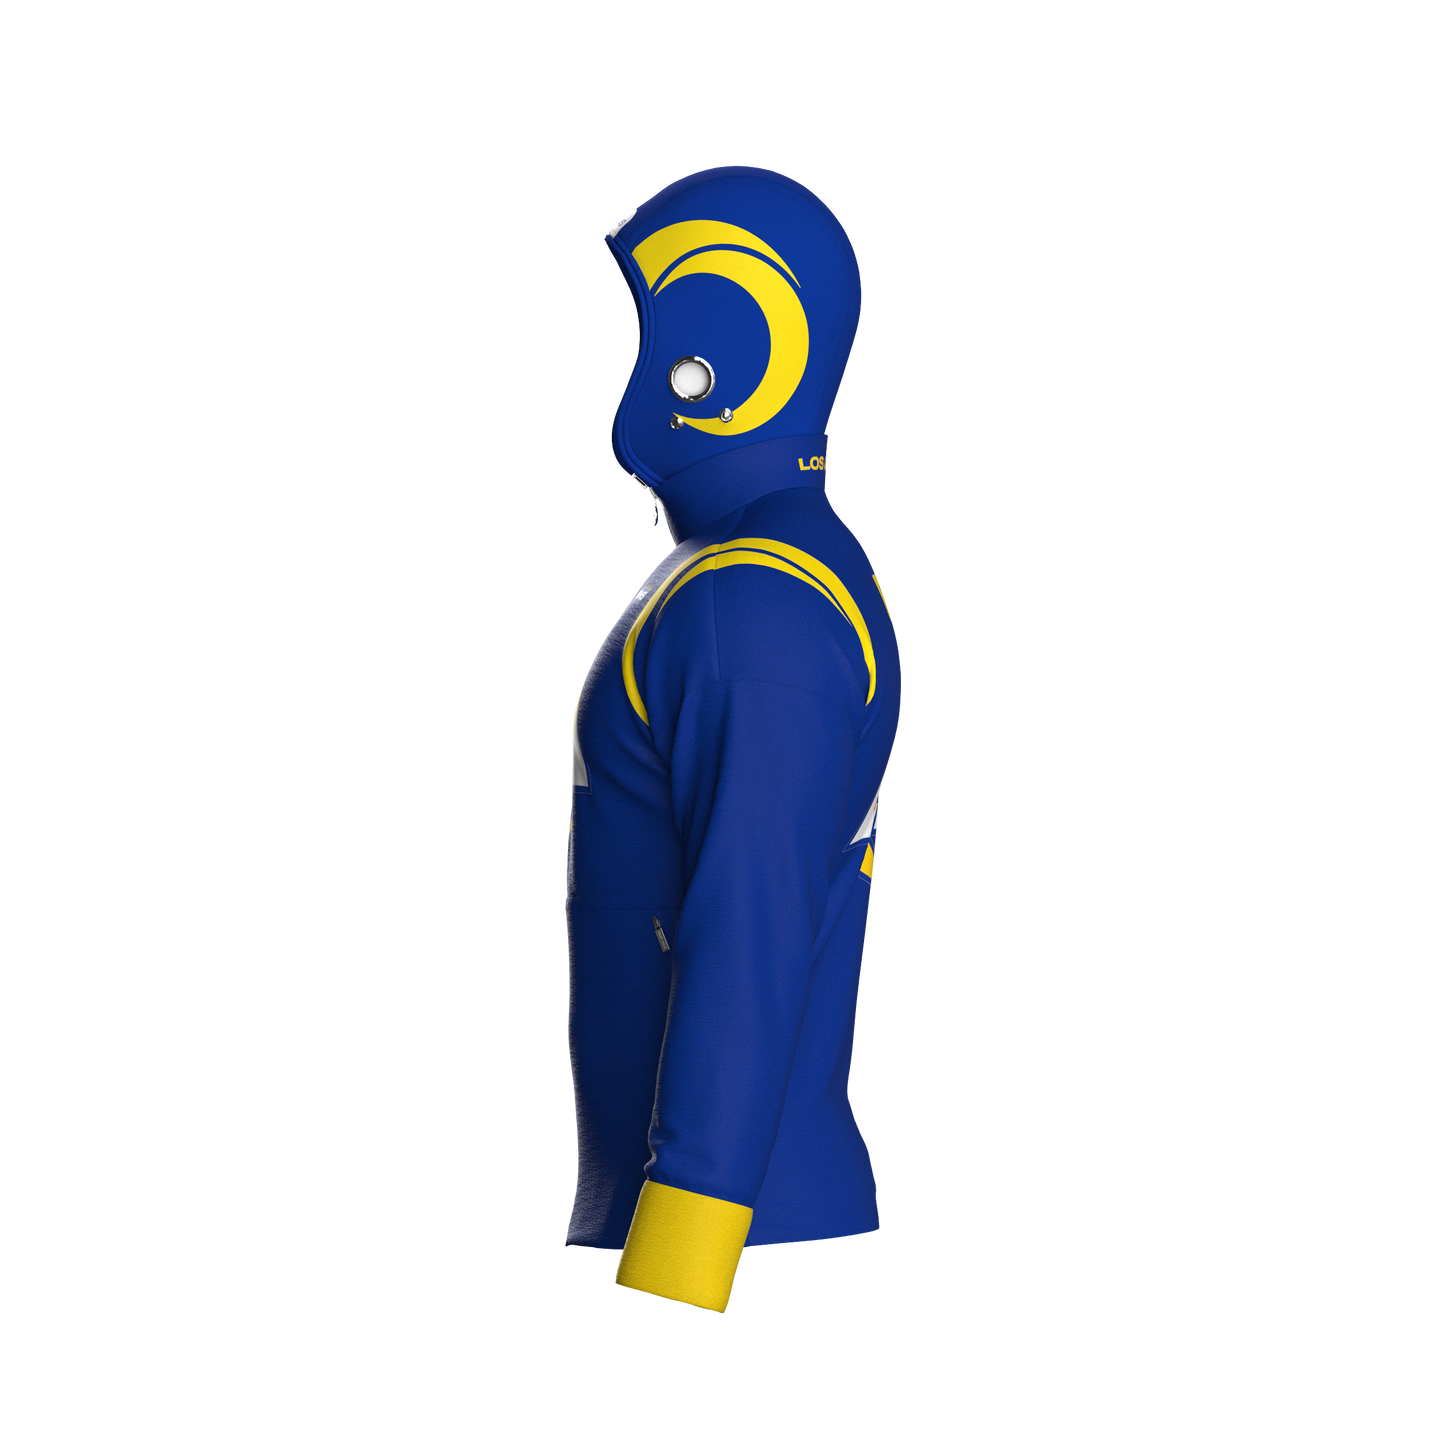 Los Angeles Rams Home Zip-Up (youth)